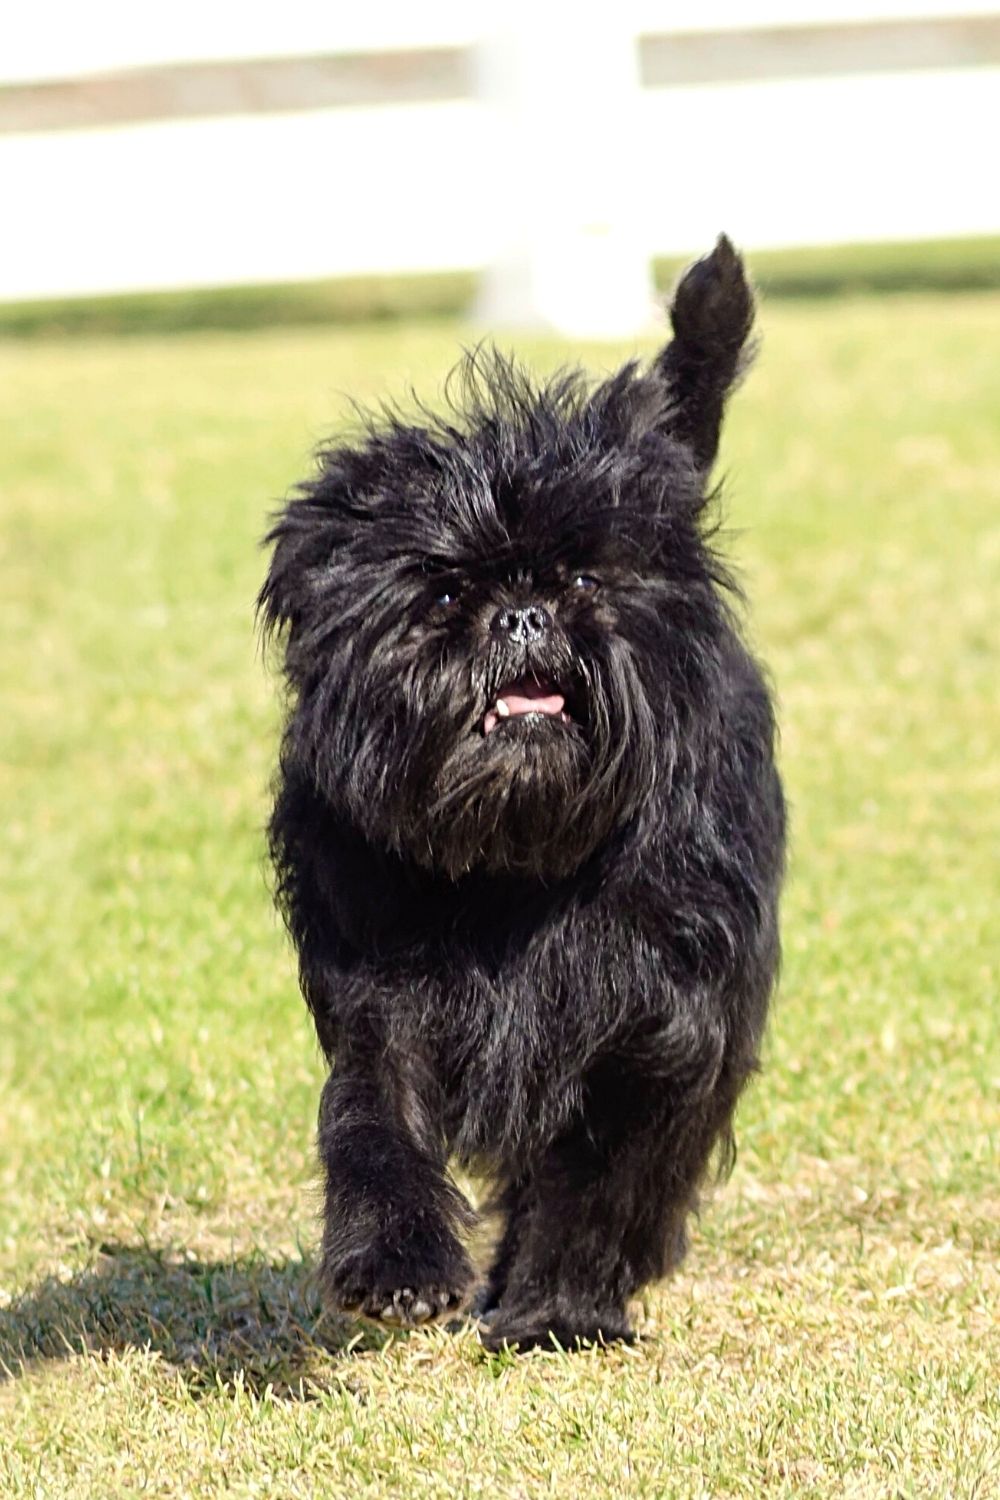 The Affenpinscher is the only one with a hypoallergenic coat among the breeds of dogs that looks like the Ewoks from Star Wars